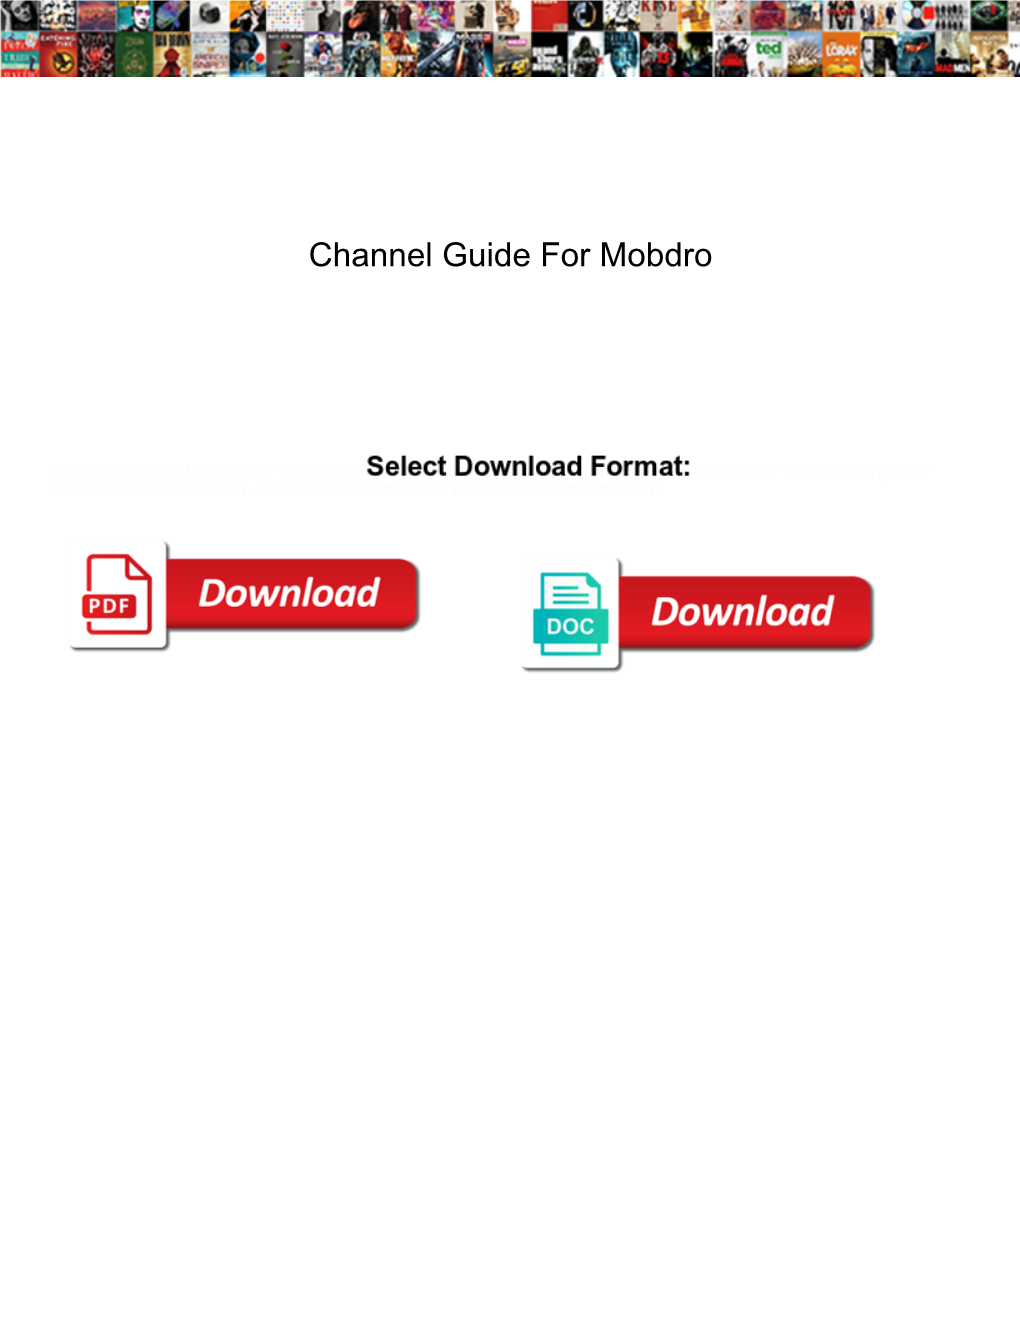 Channel Guide for Mobdro